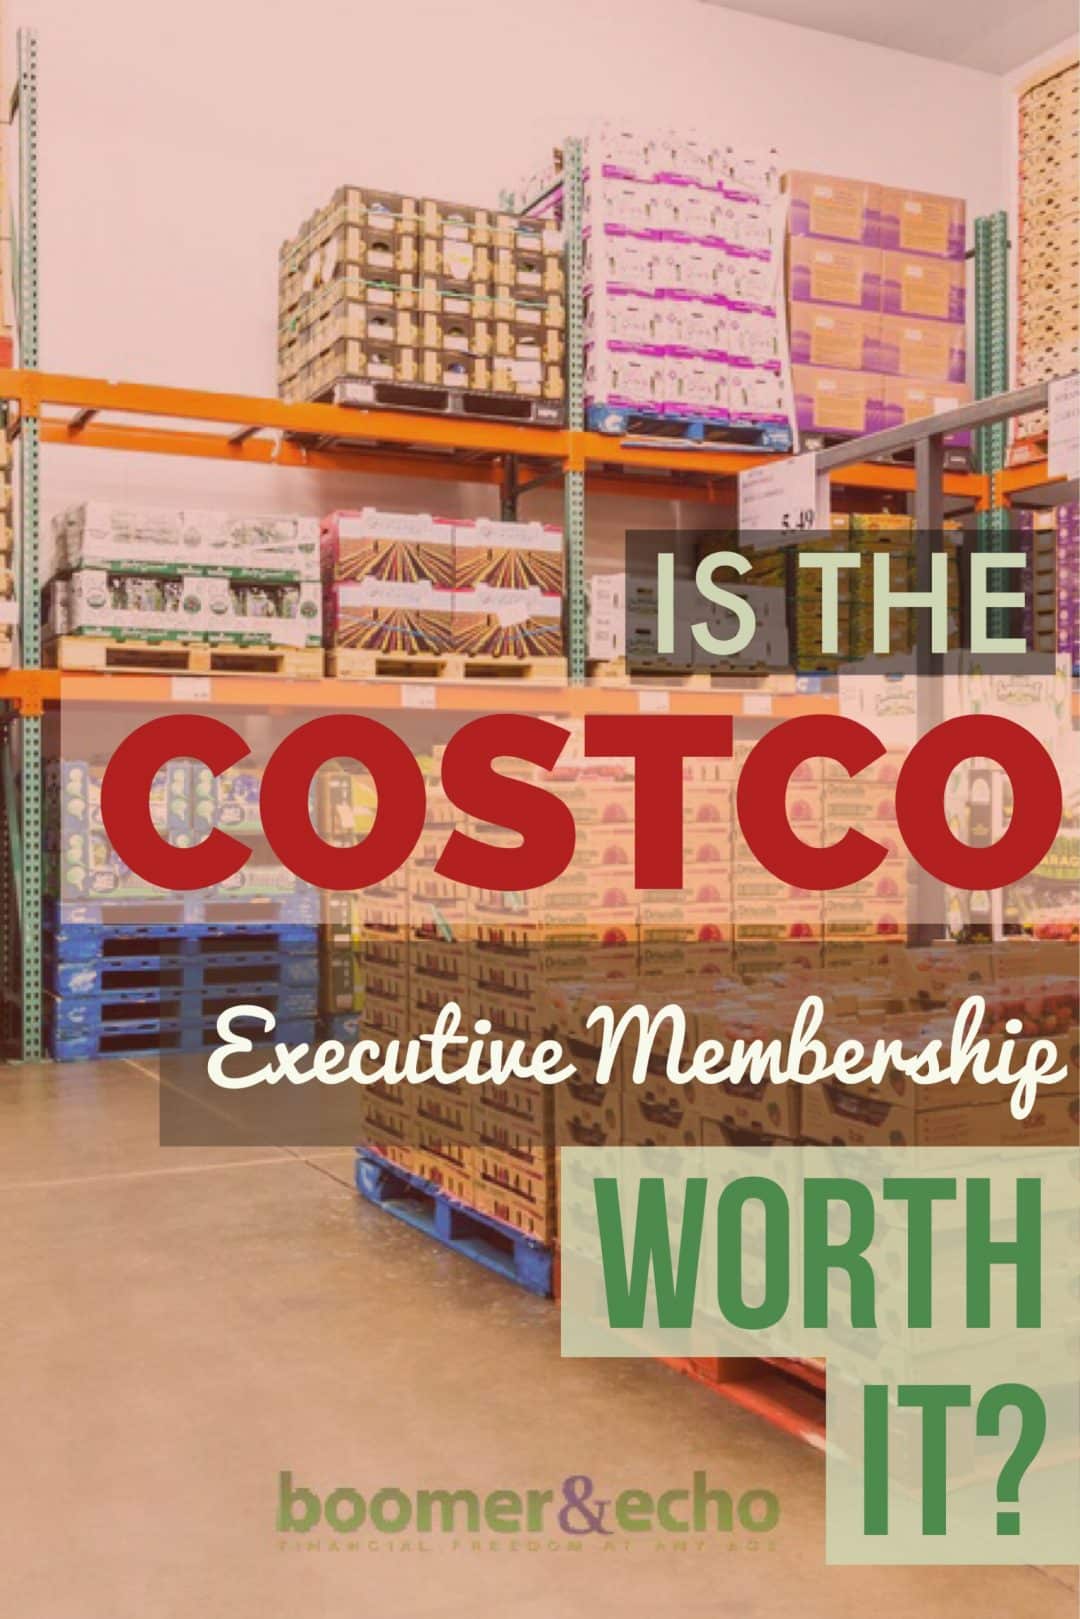 what-is-worth-buying-at-costco-kcpc